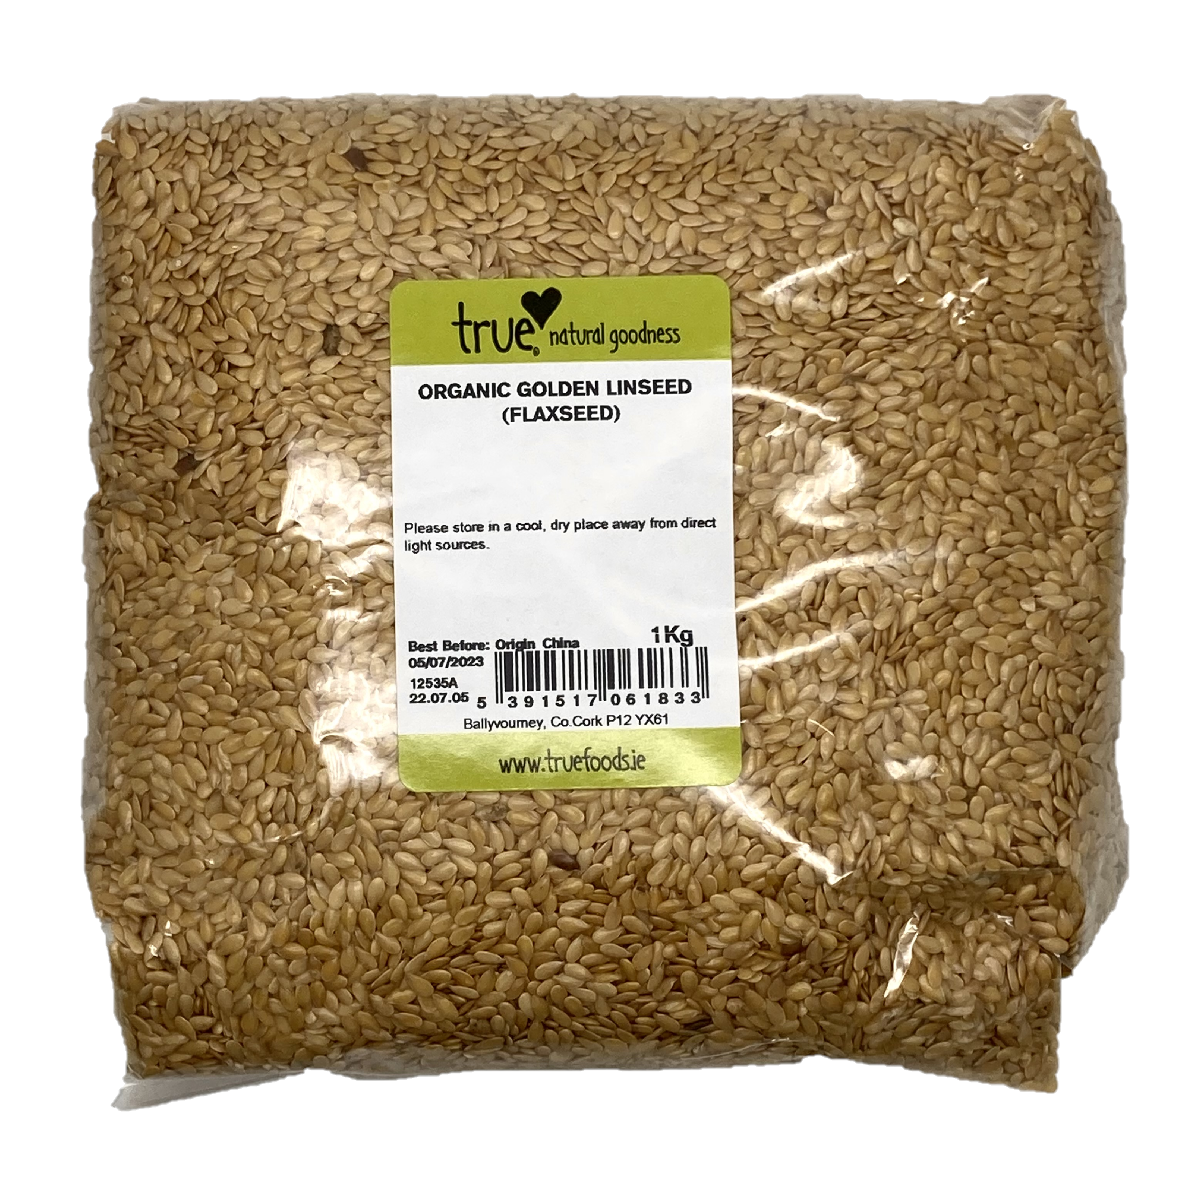 True Natural Goodness Organic Golden Linseed (Flaxseed) 1kg